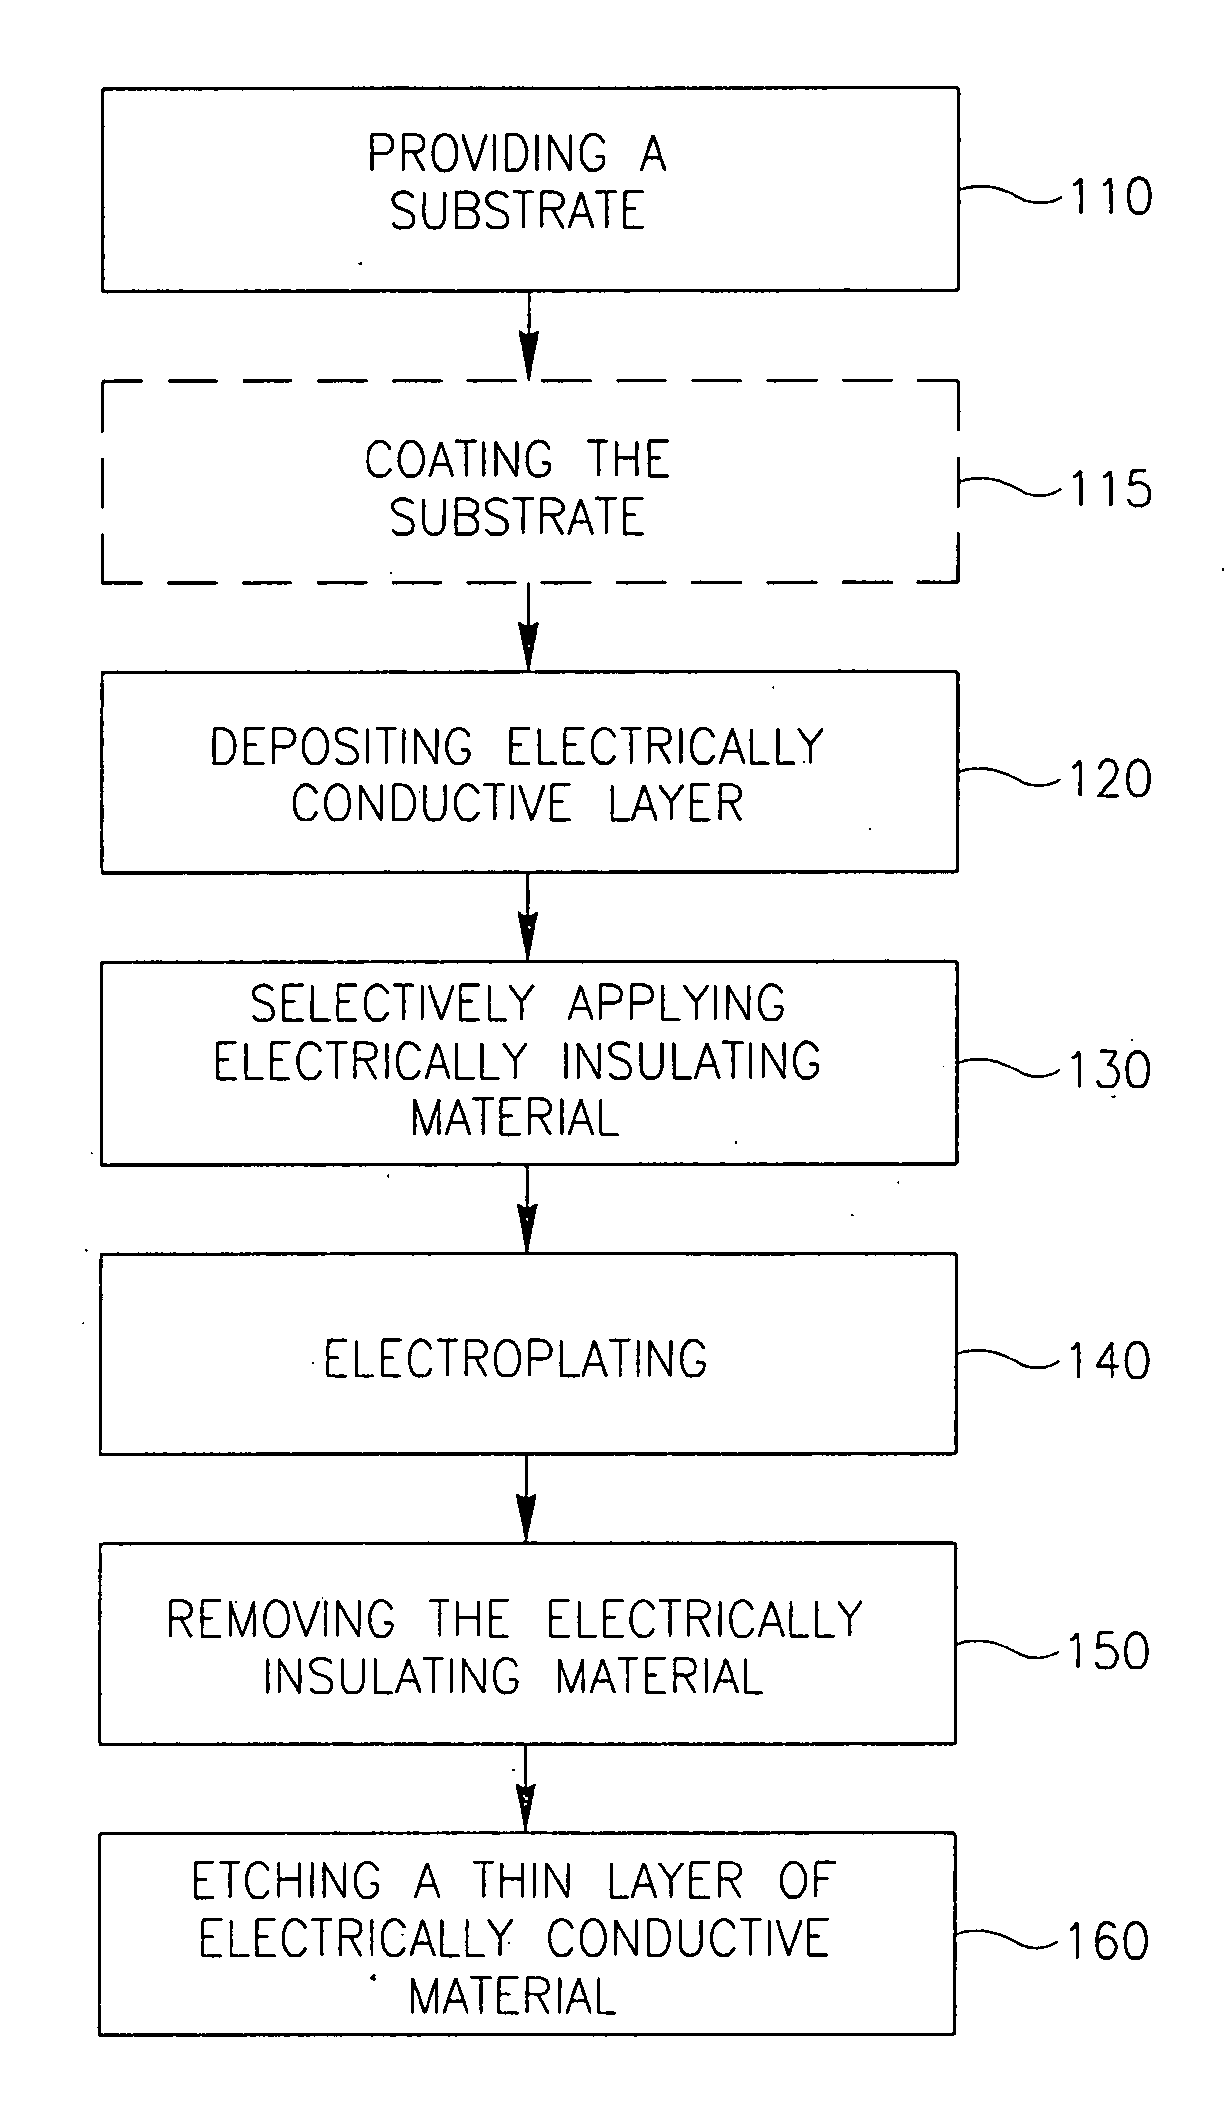 Patterns of conductive objects on a substrate and method of producing thereof